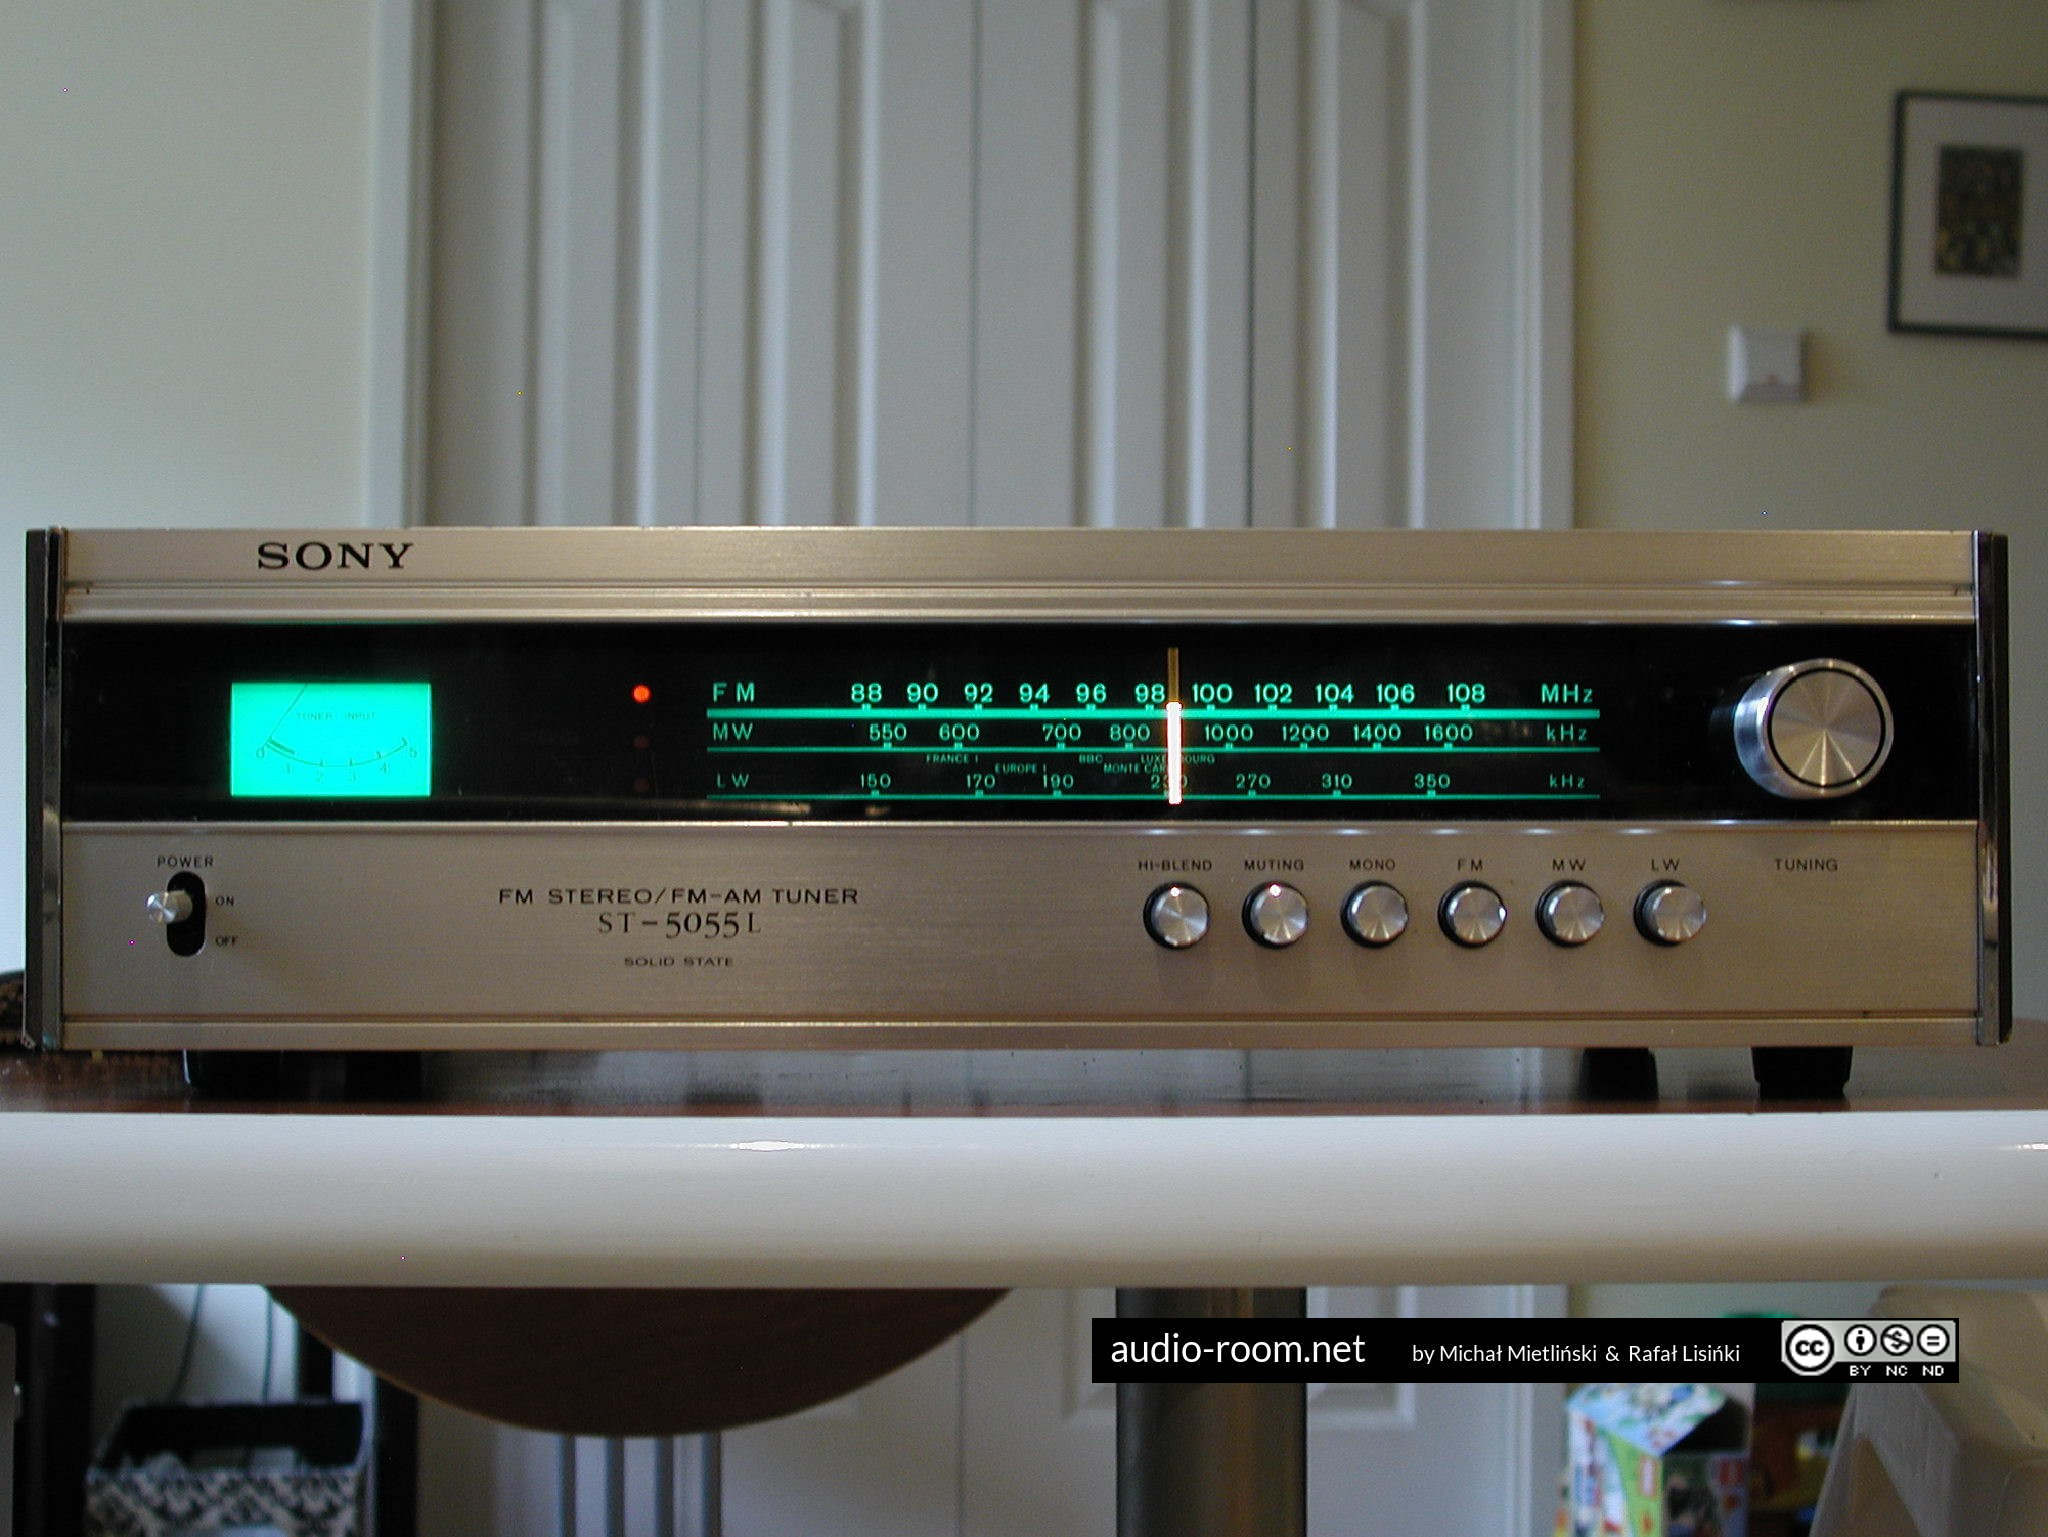 Sony ST-5055/ST-5055L radio tuner: a great companion to the 